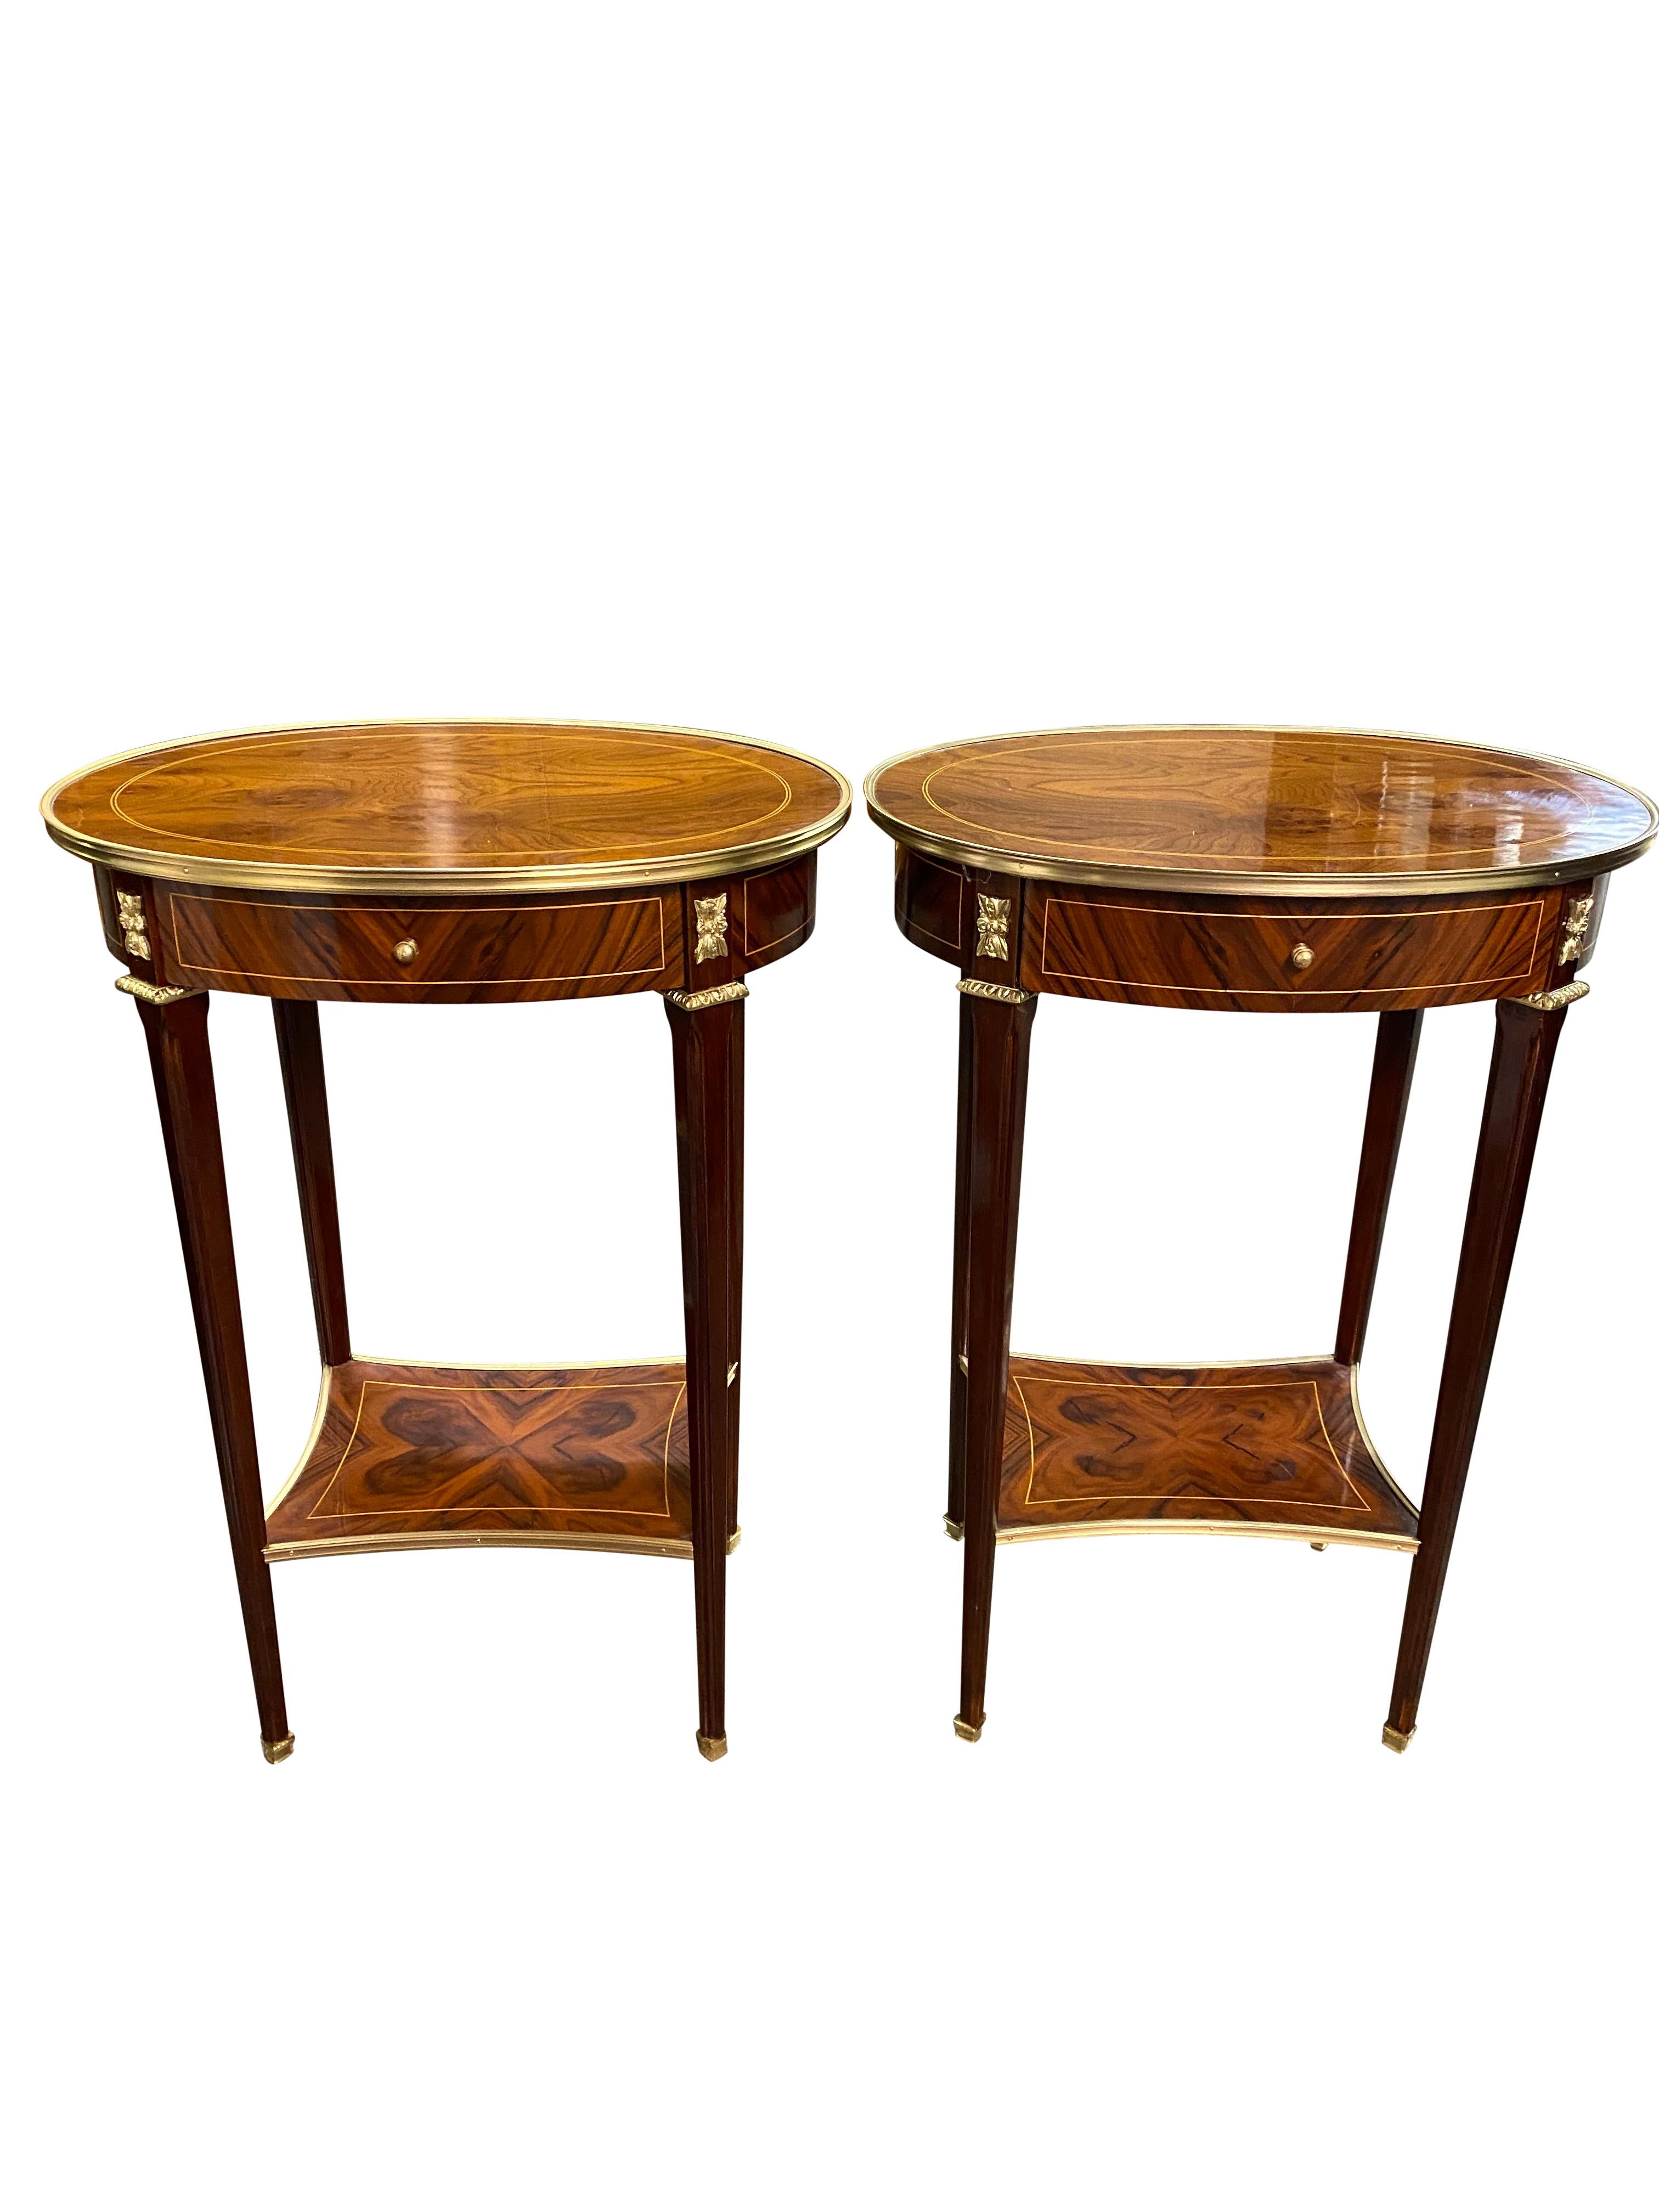 Pair of Oval Top 20th Century English Regency Style Side Tables For Sale 5